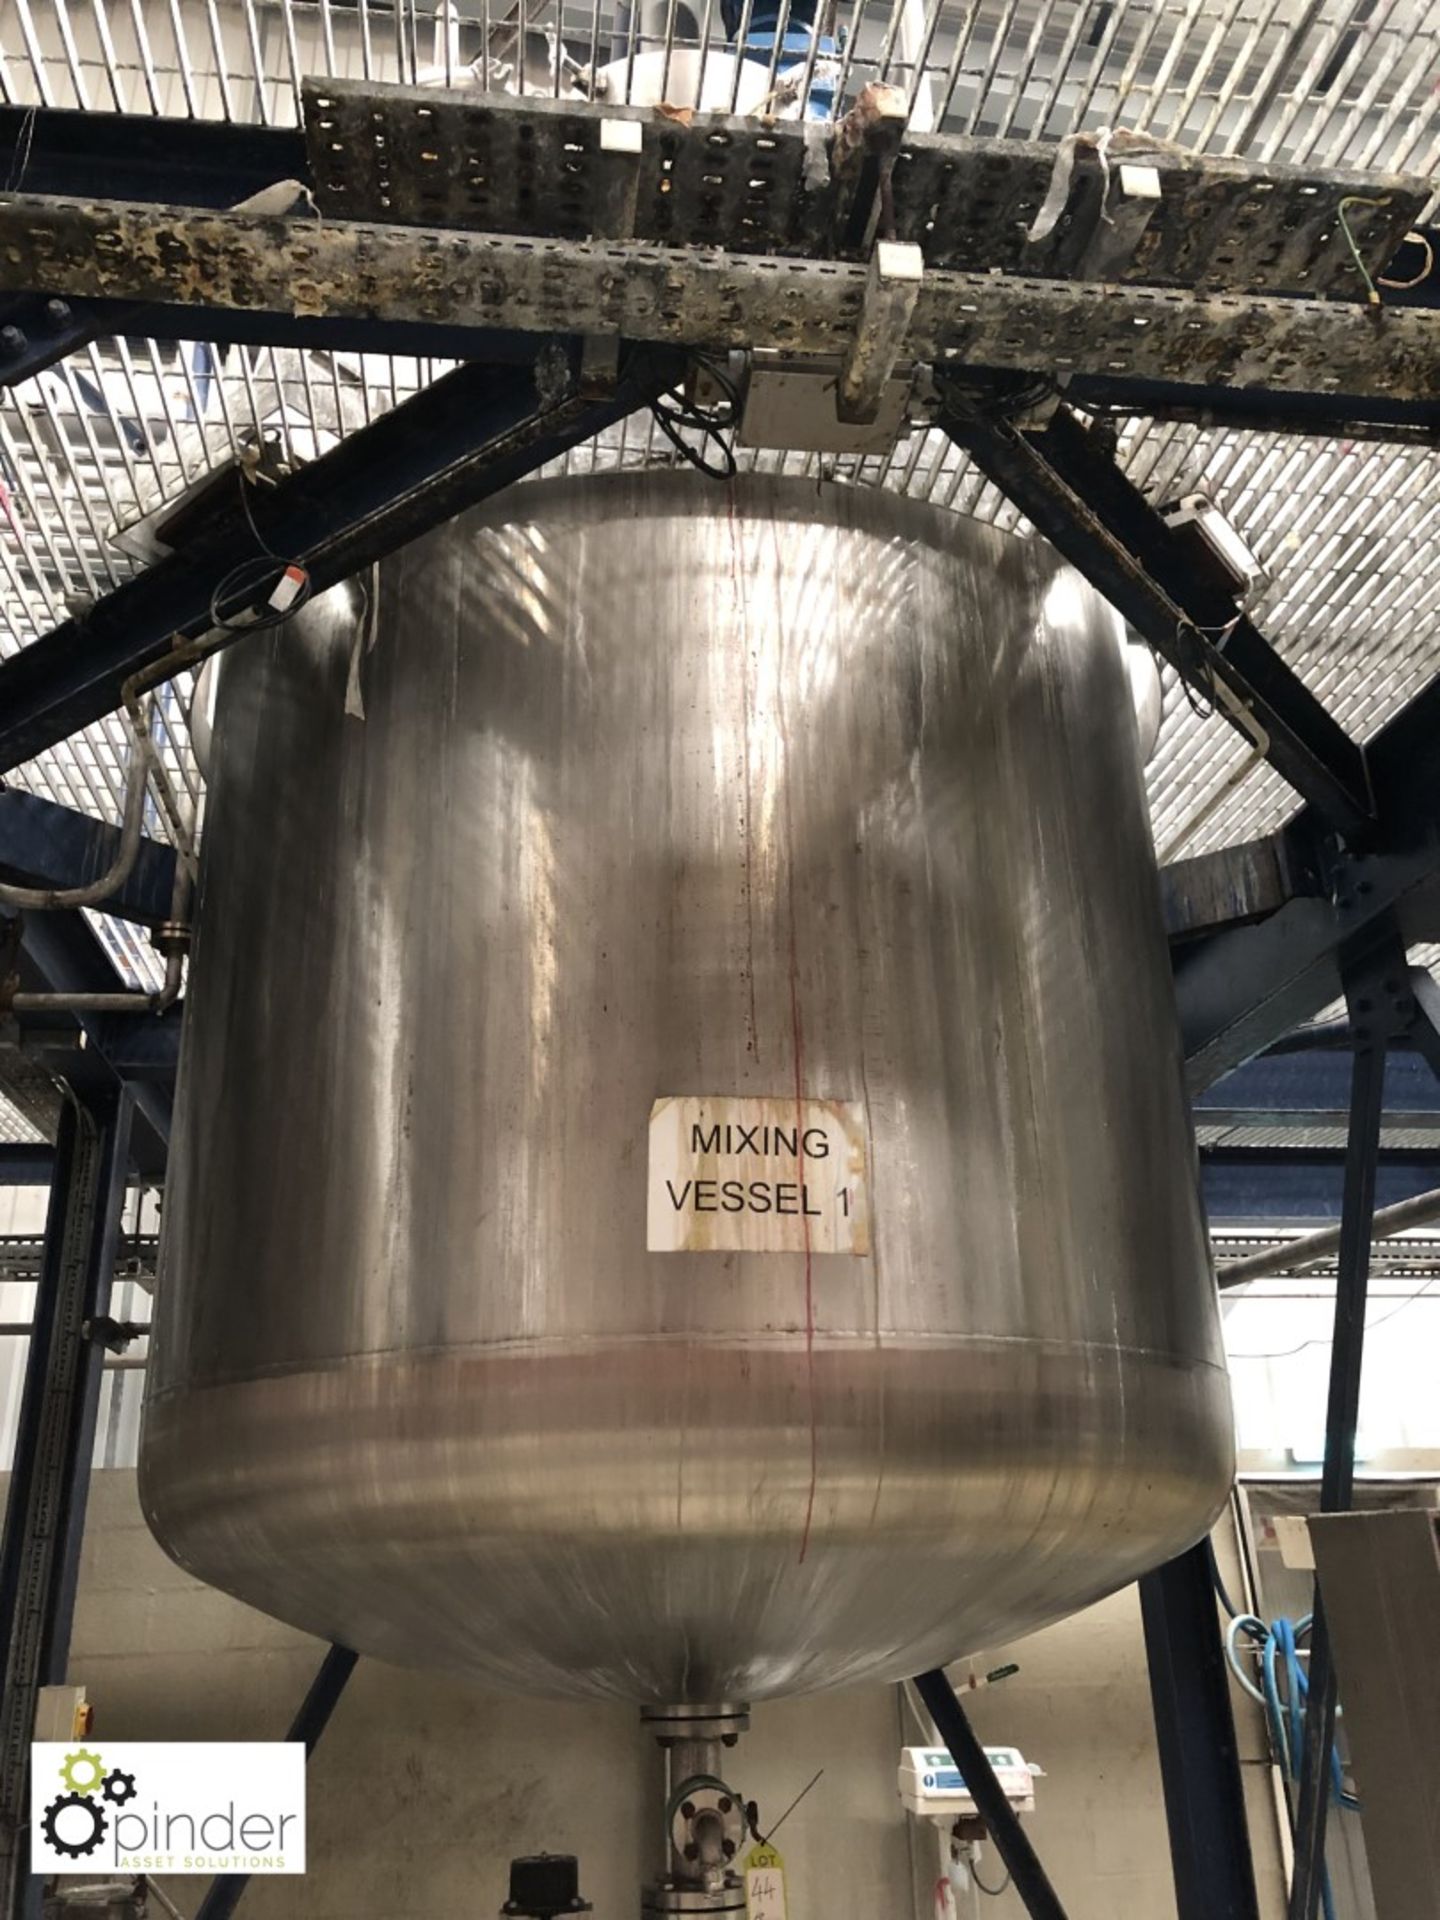 Stainless steel Mixing Vessel, 6000litres, with motorised gearbox, Allen Bradley Panel View 1000 - Image 4 of 11